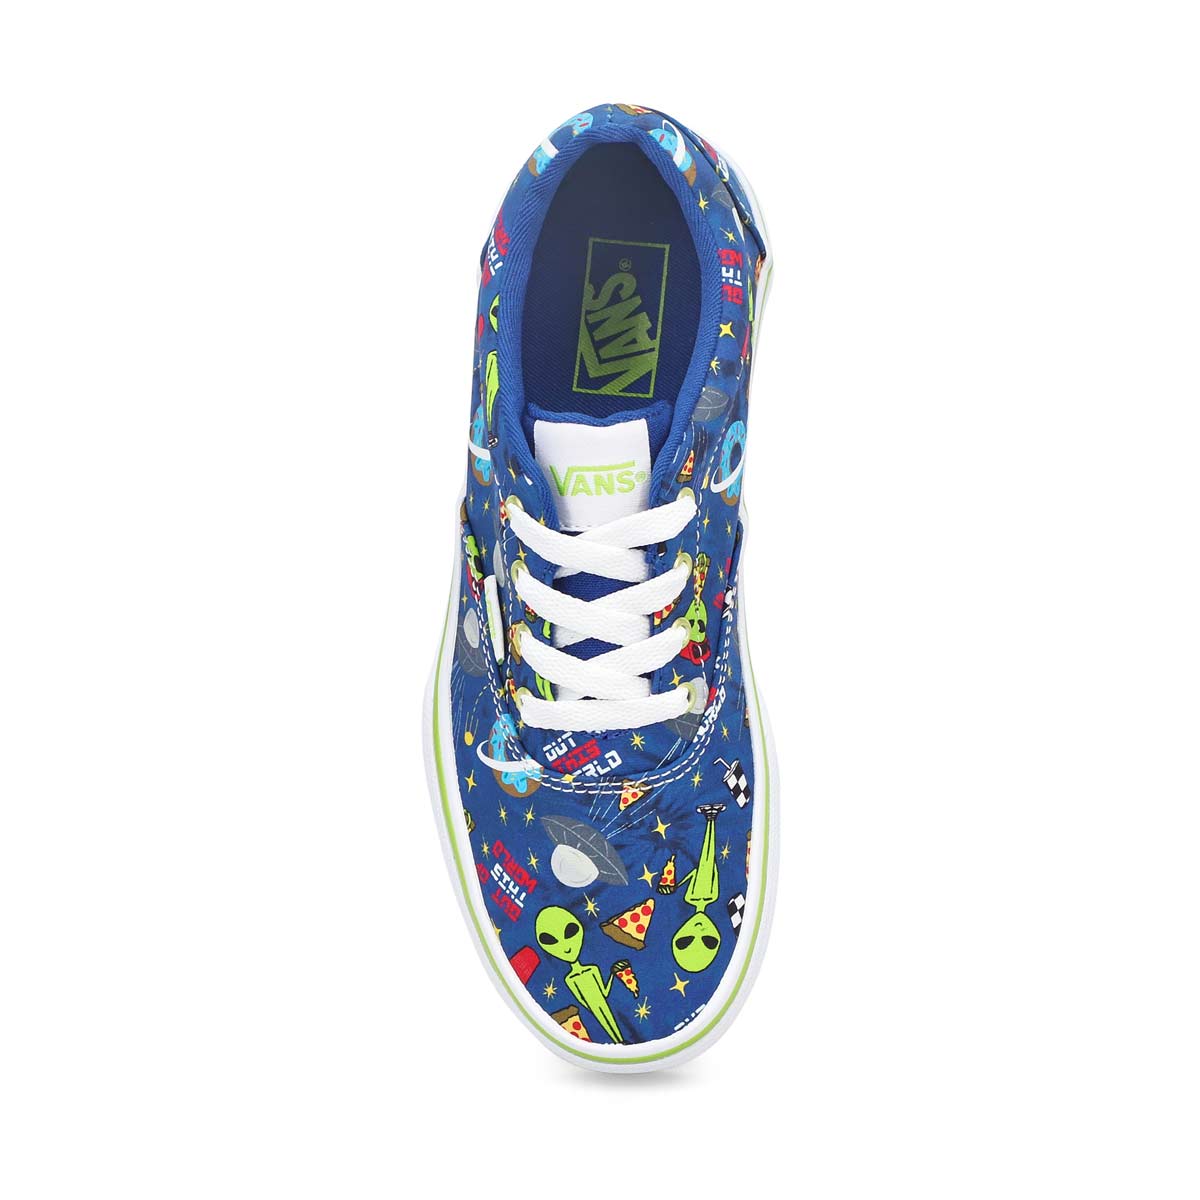 Boys' Doheny Spaced Out Sneakers - Blue